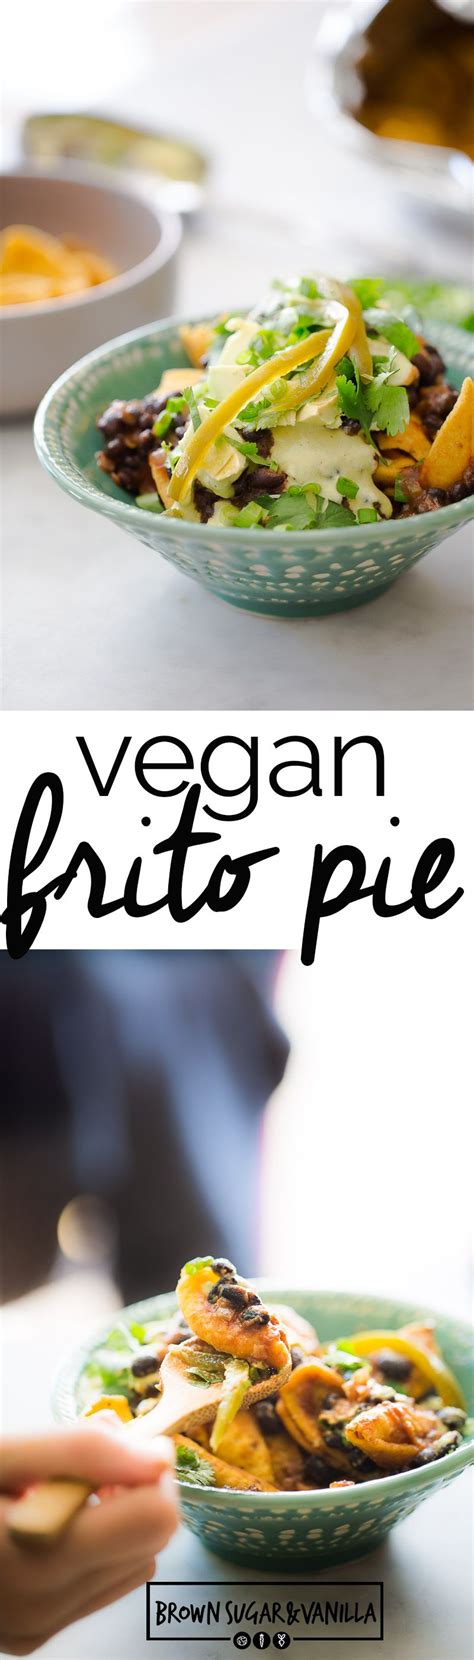 Healthy Vegan Frito Pie Recipe With Images Frito Pie